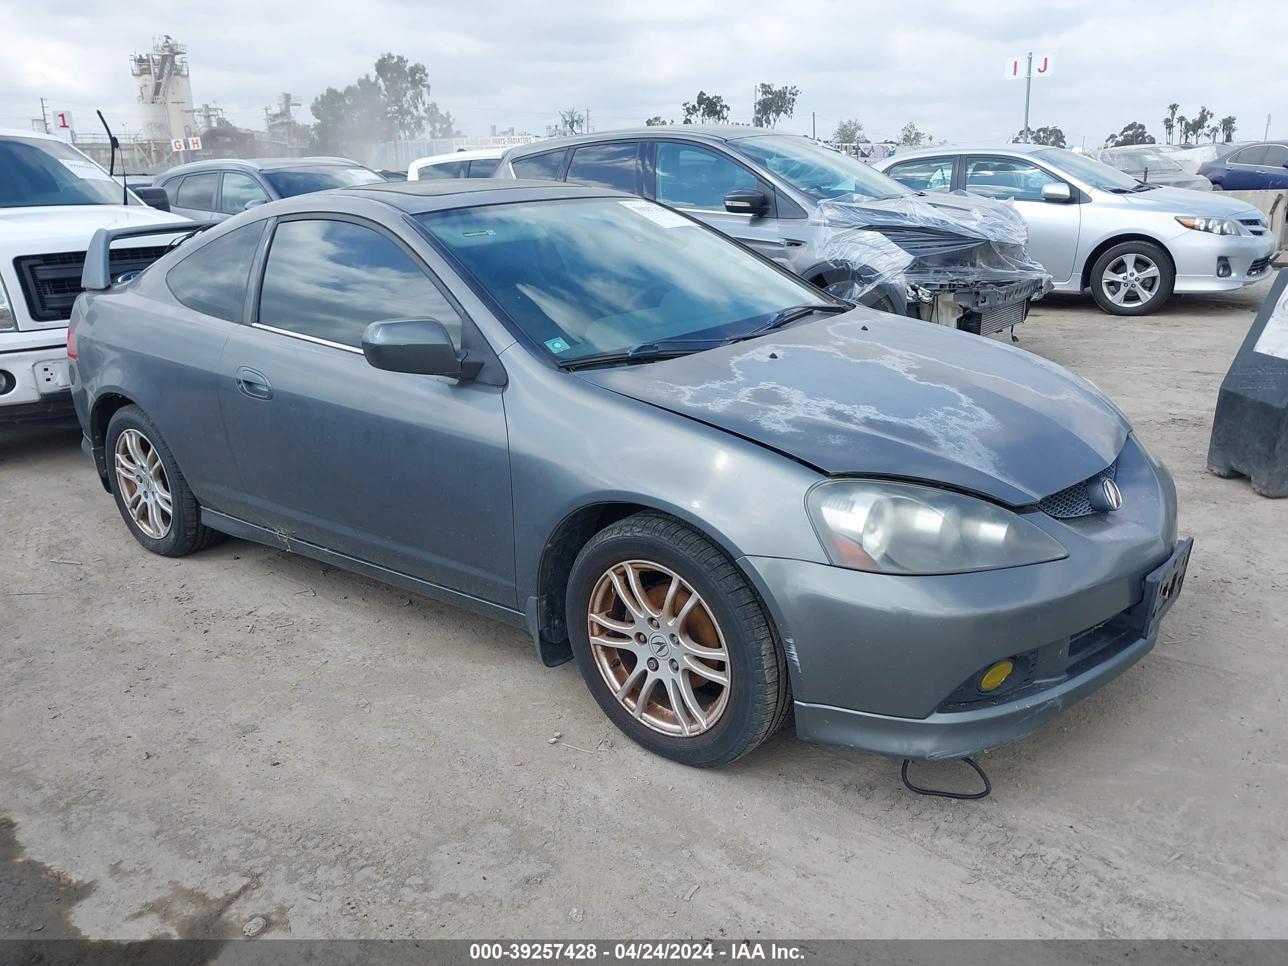 vin: JH4DC54815S007894 JH4DC54815S007894 2005 acura rsx 2000 for Sale in 91605, 7245 Laurel Canyon Blvd, Los Angeles, California, USA